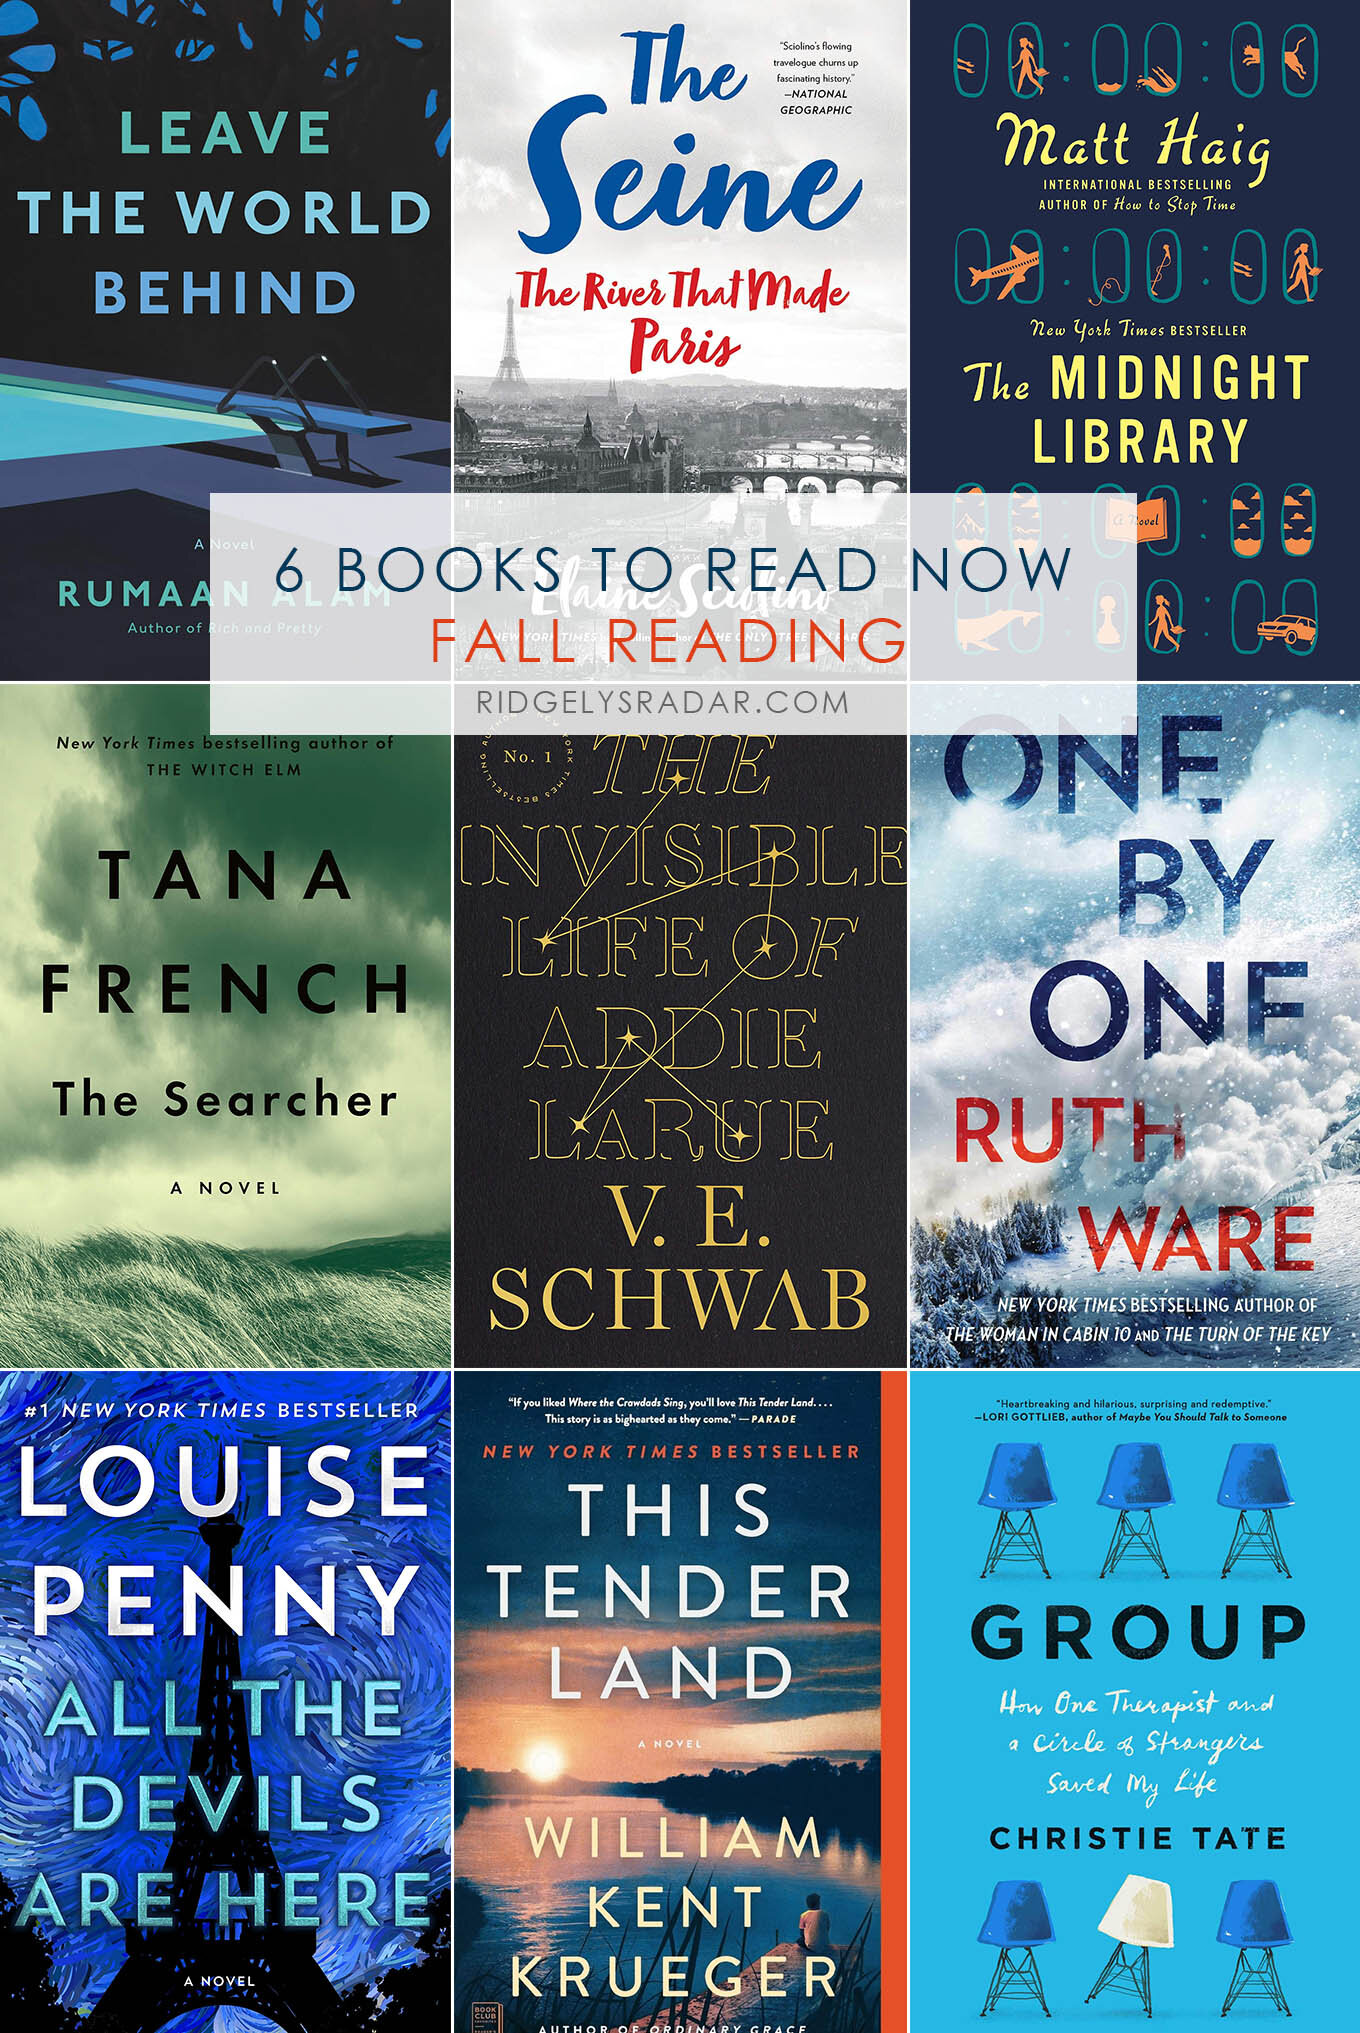 Are you looking for a good read? Check out these 6 books to read now! New releases in Thrillers, Mystery and Fiction! Settle in and enjoy!